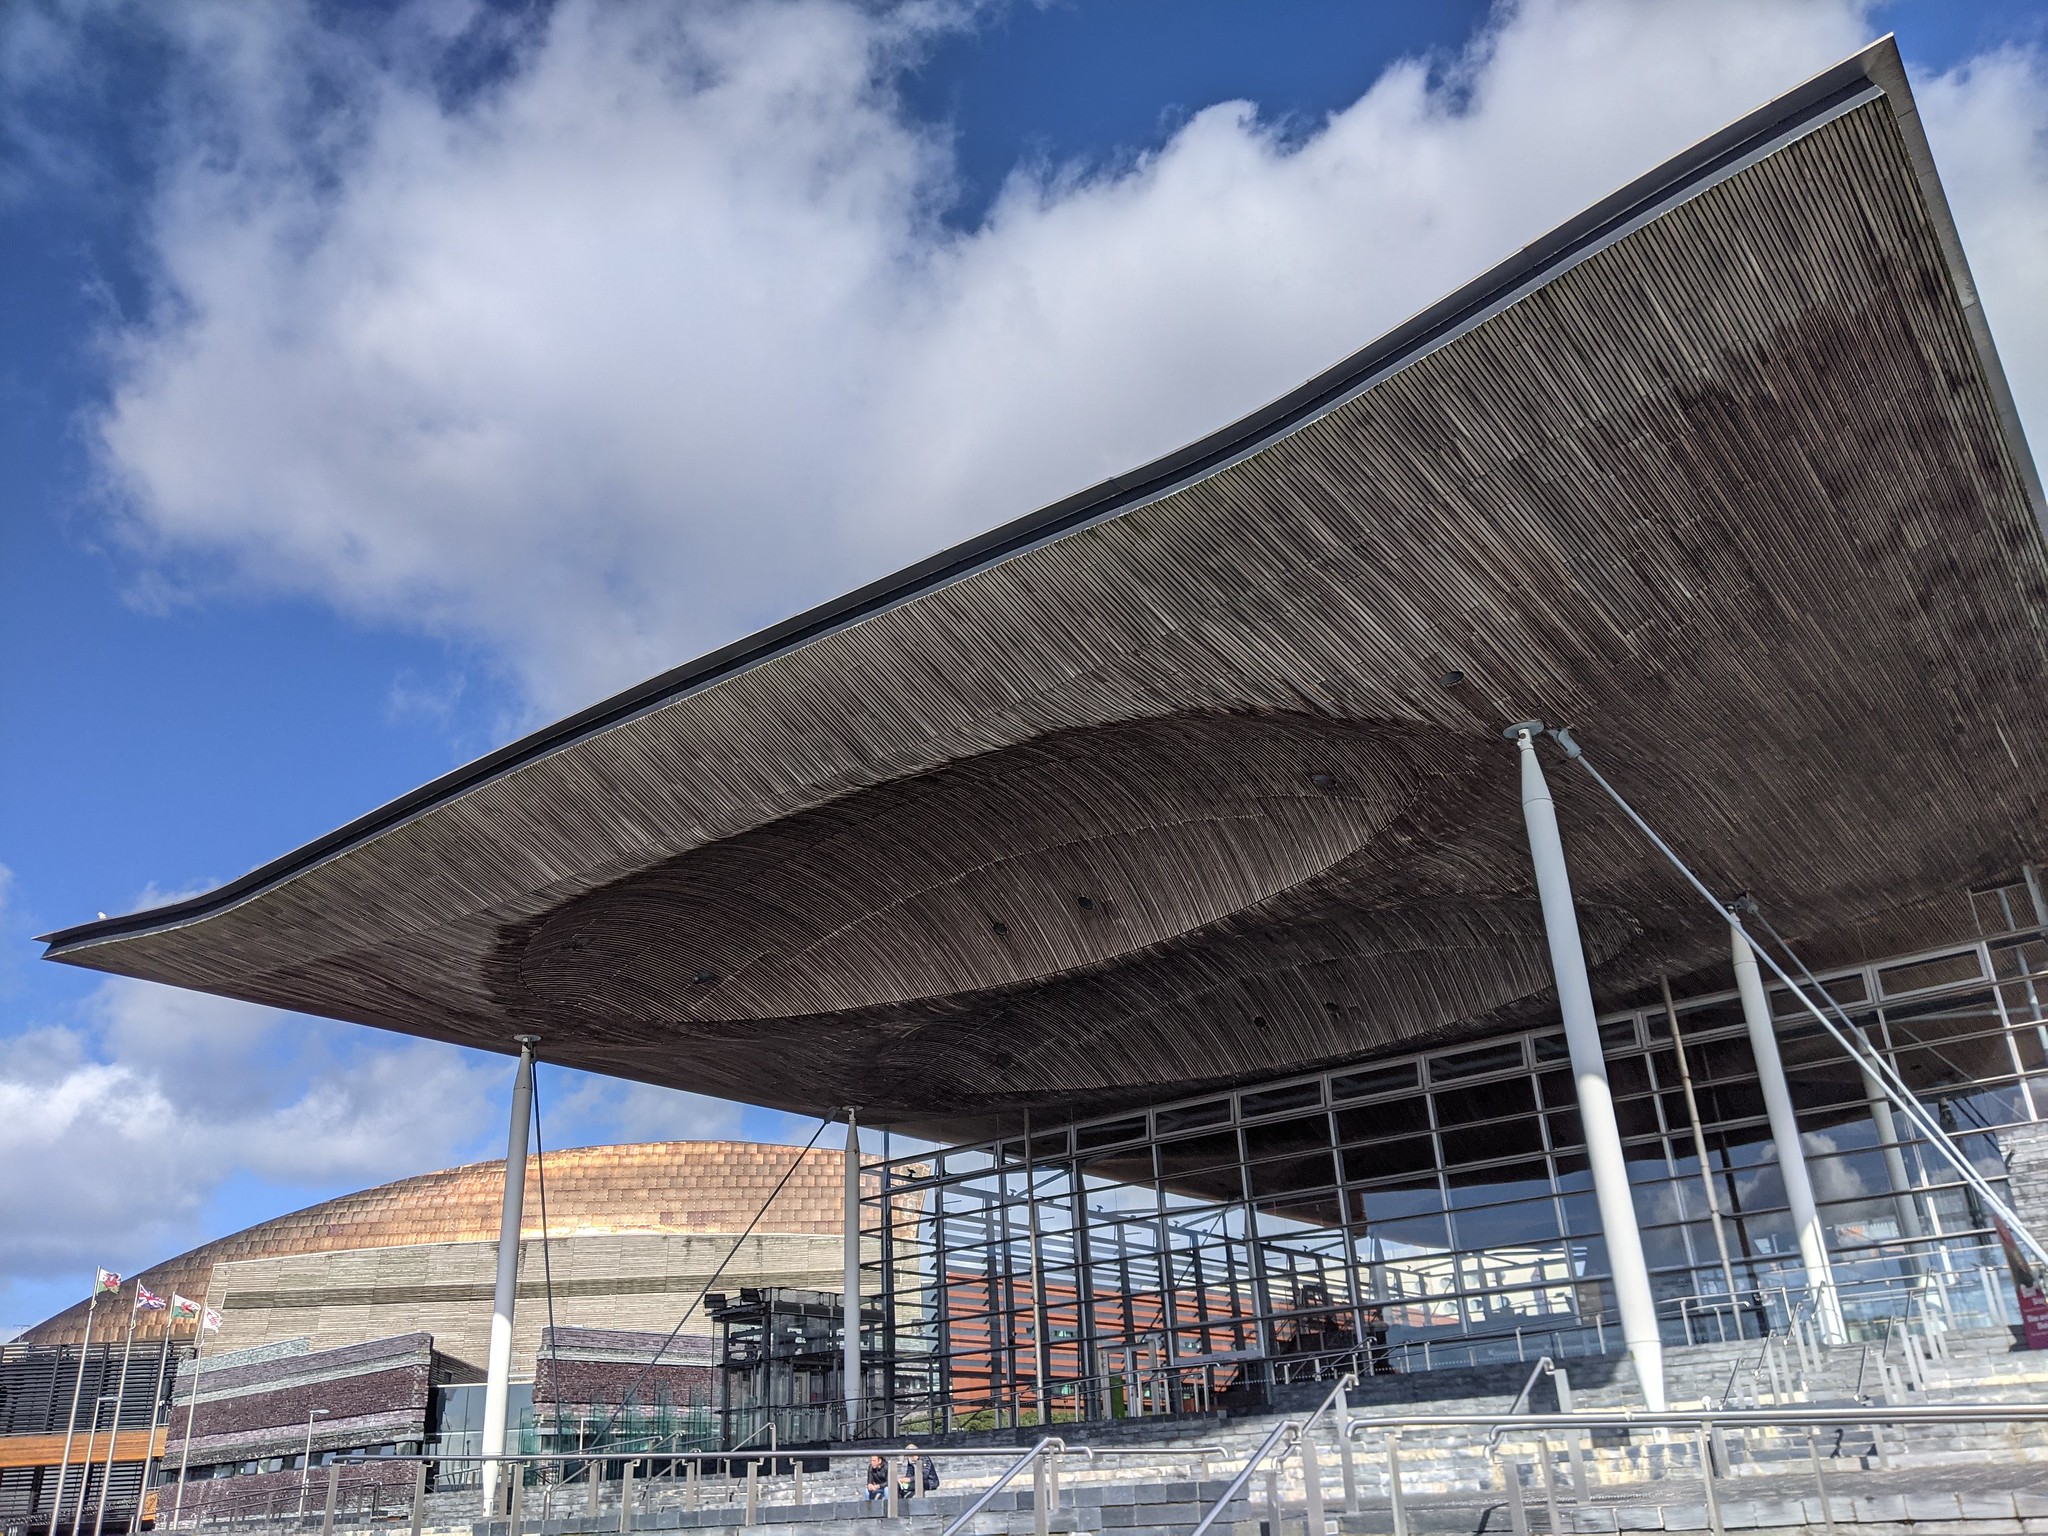 Senedd reform can be part of a suite of measures to reinvigorate our stagnant democracy, and we must meet the scale of change, writes Joe Rossiter